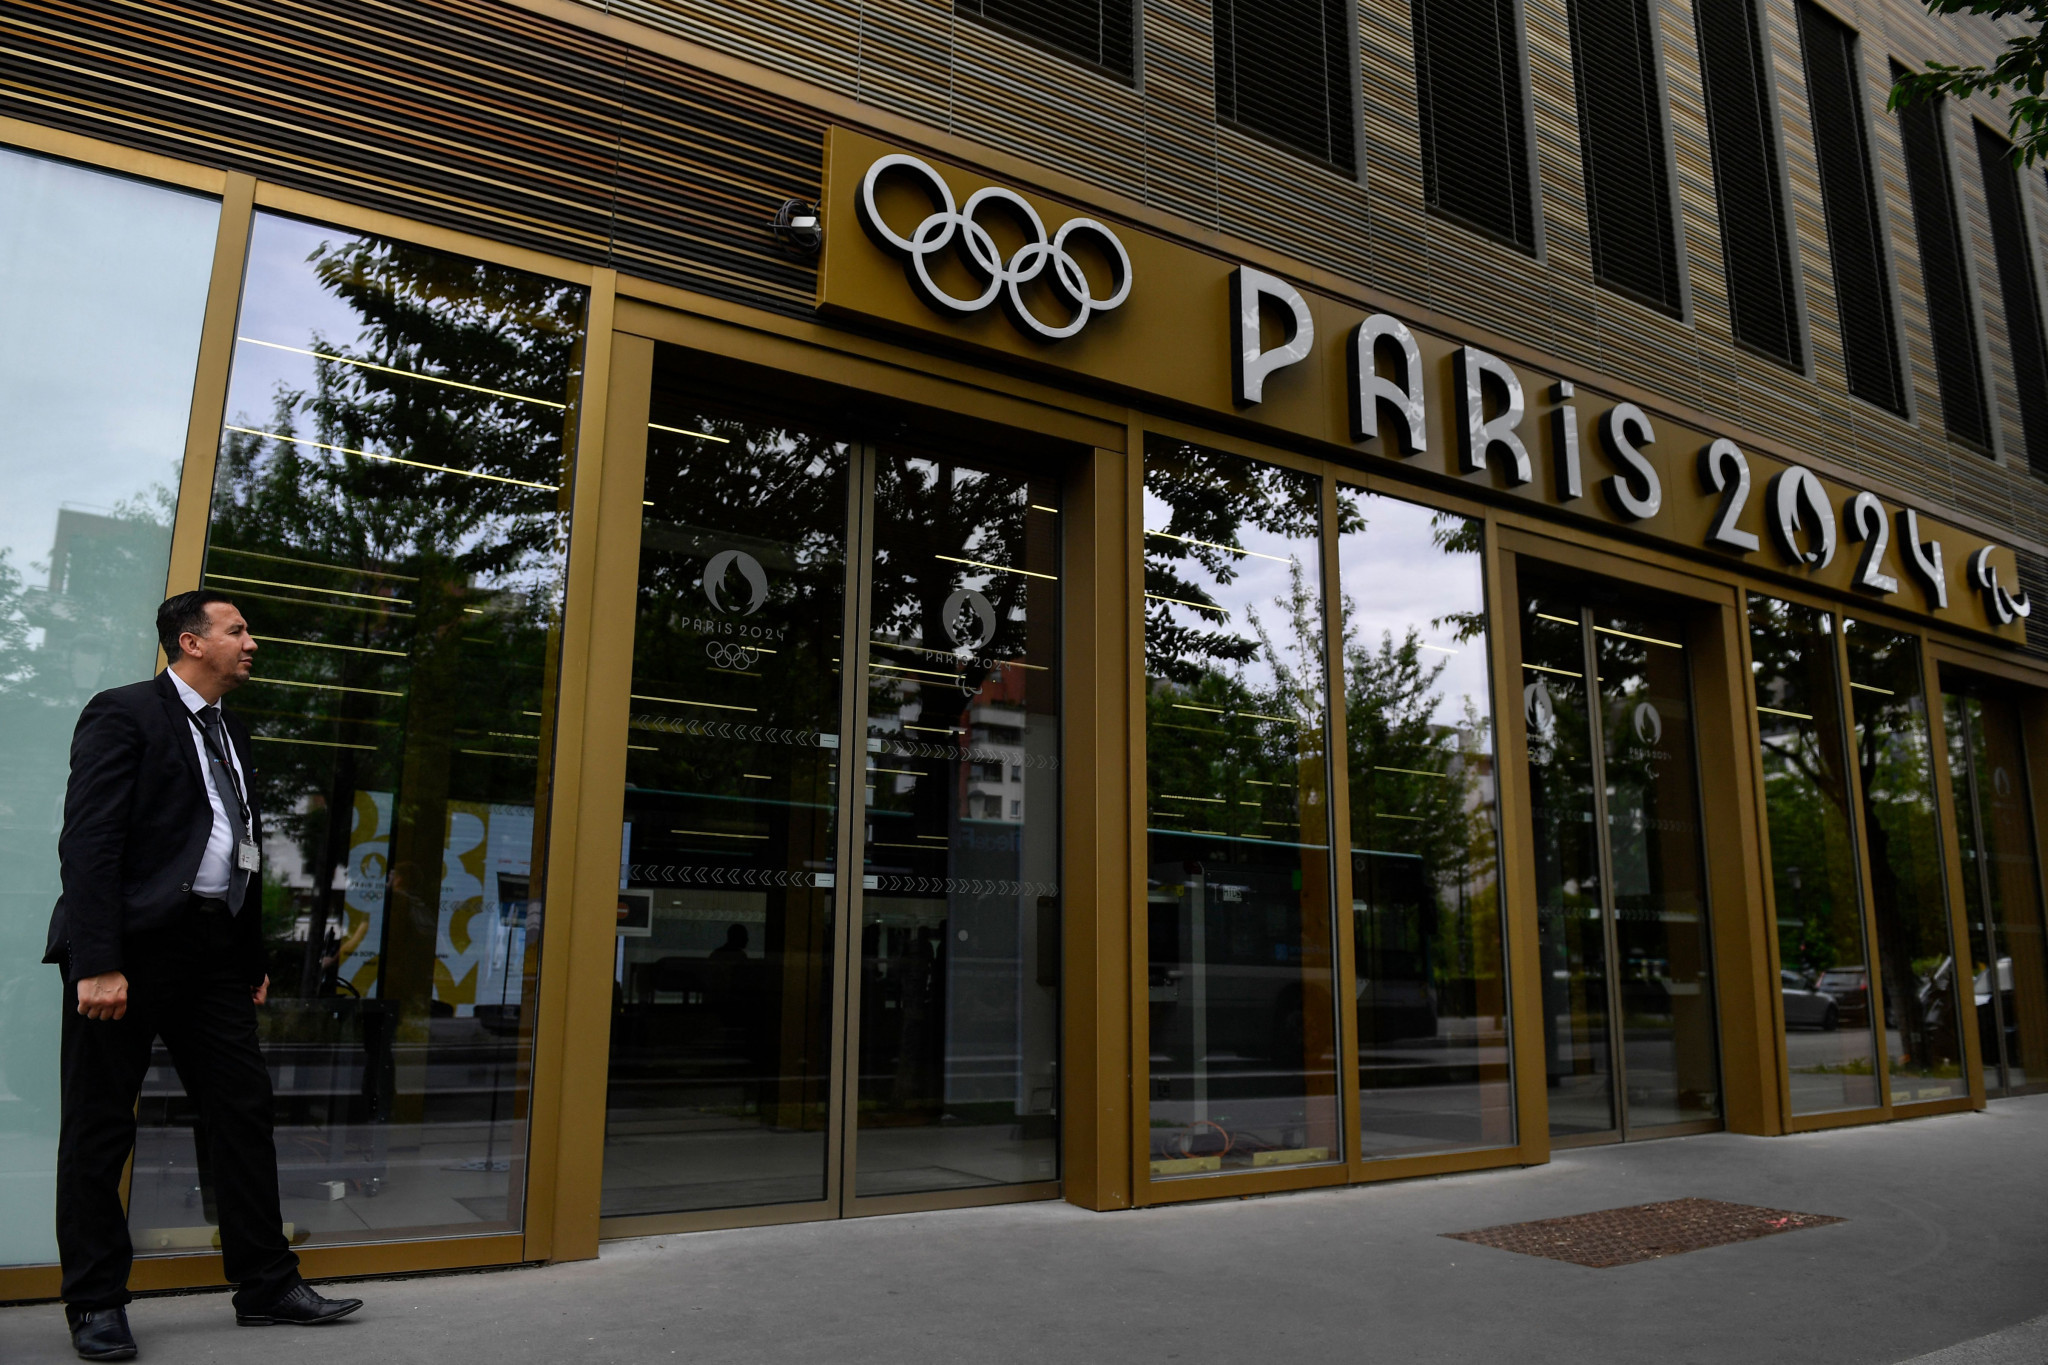 A security official stands at the entrance of the Paris 2024 headquarters following today's raid ©Getty Images